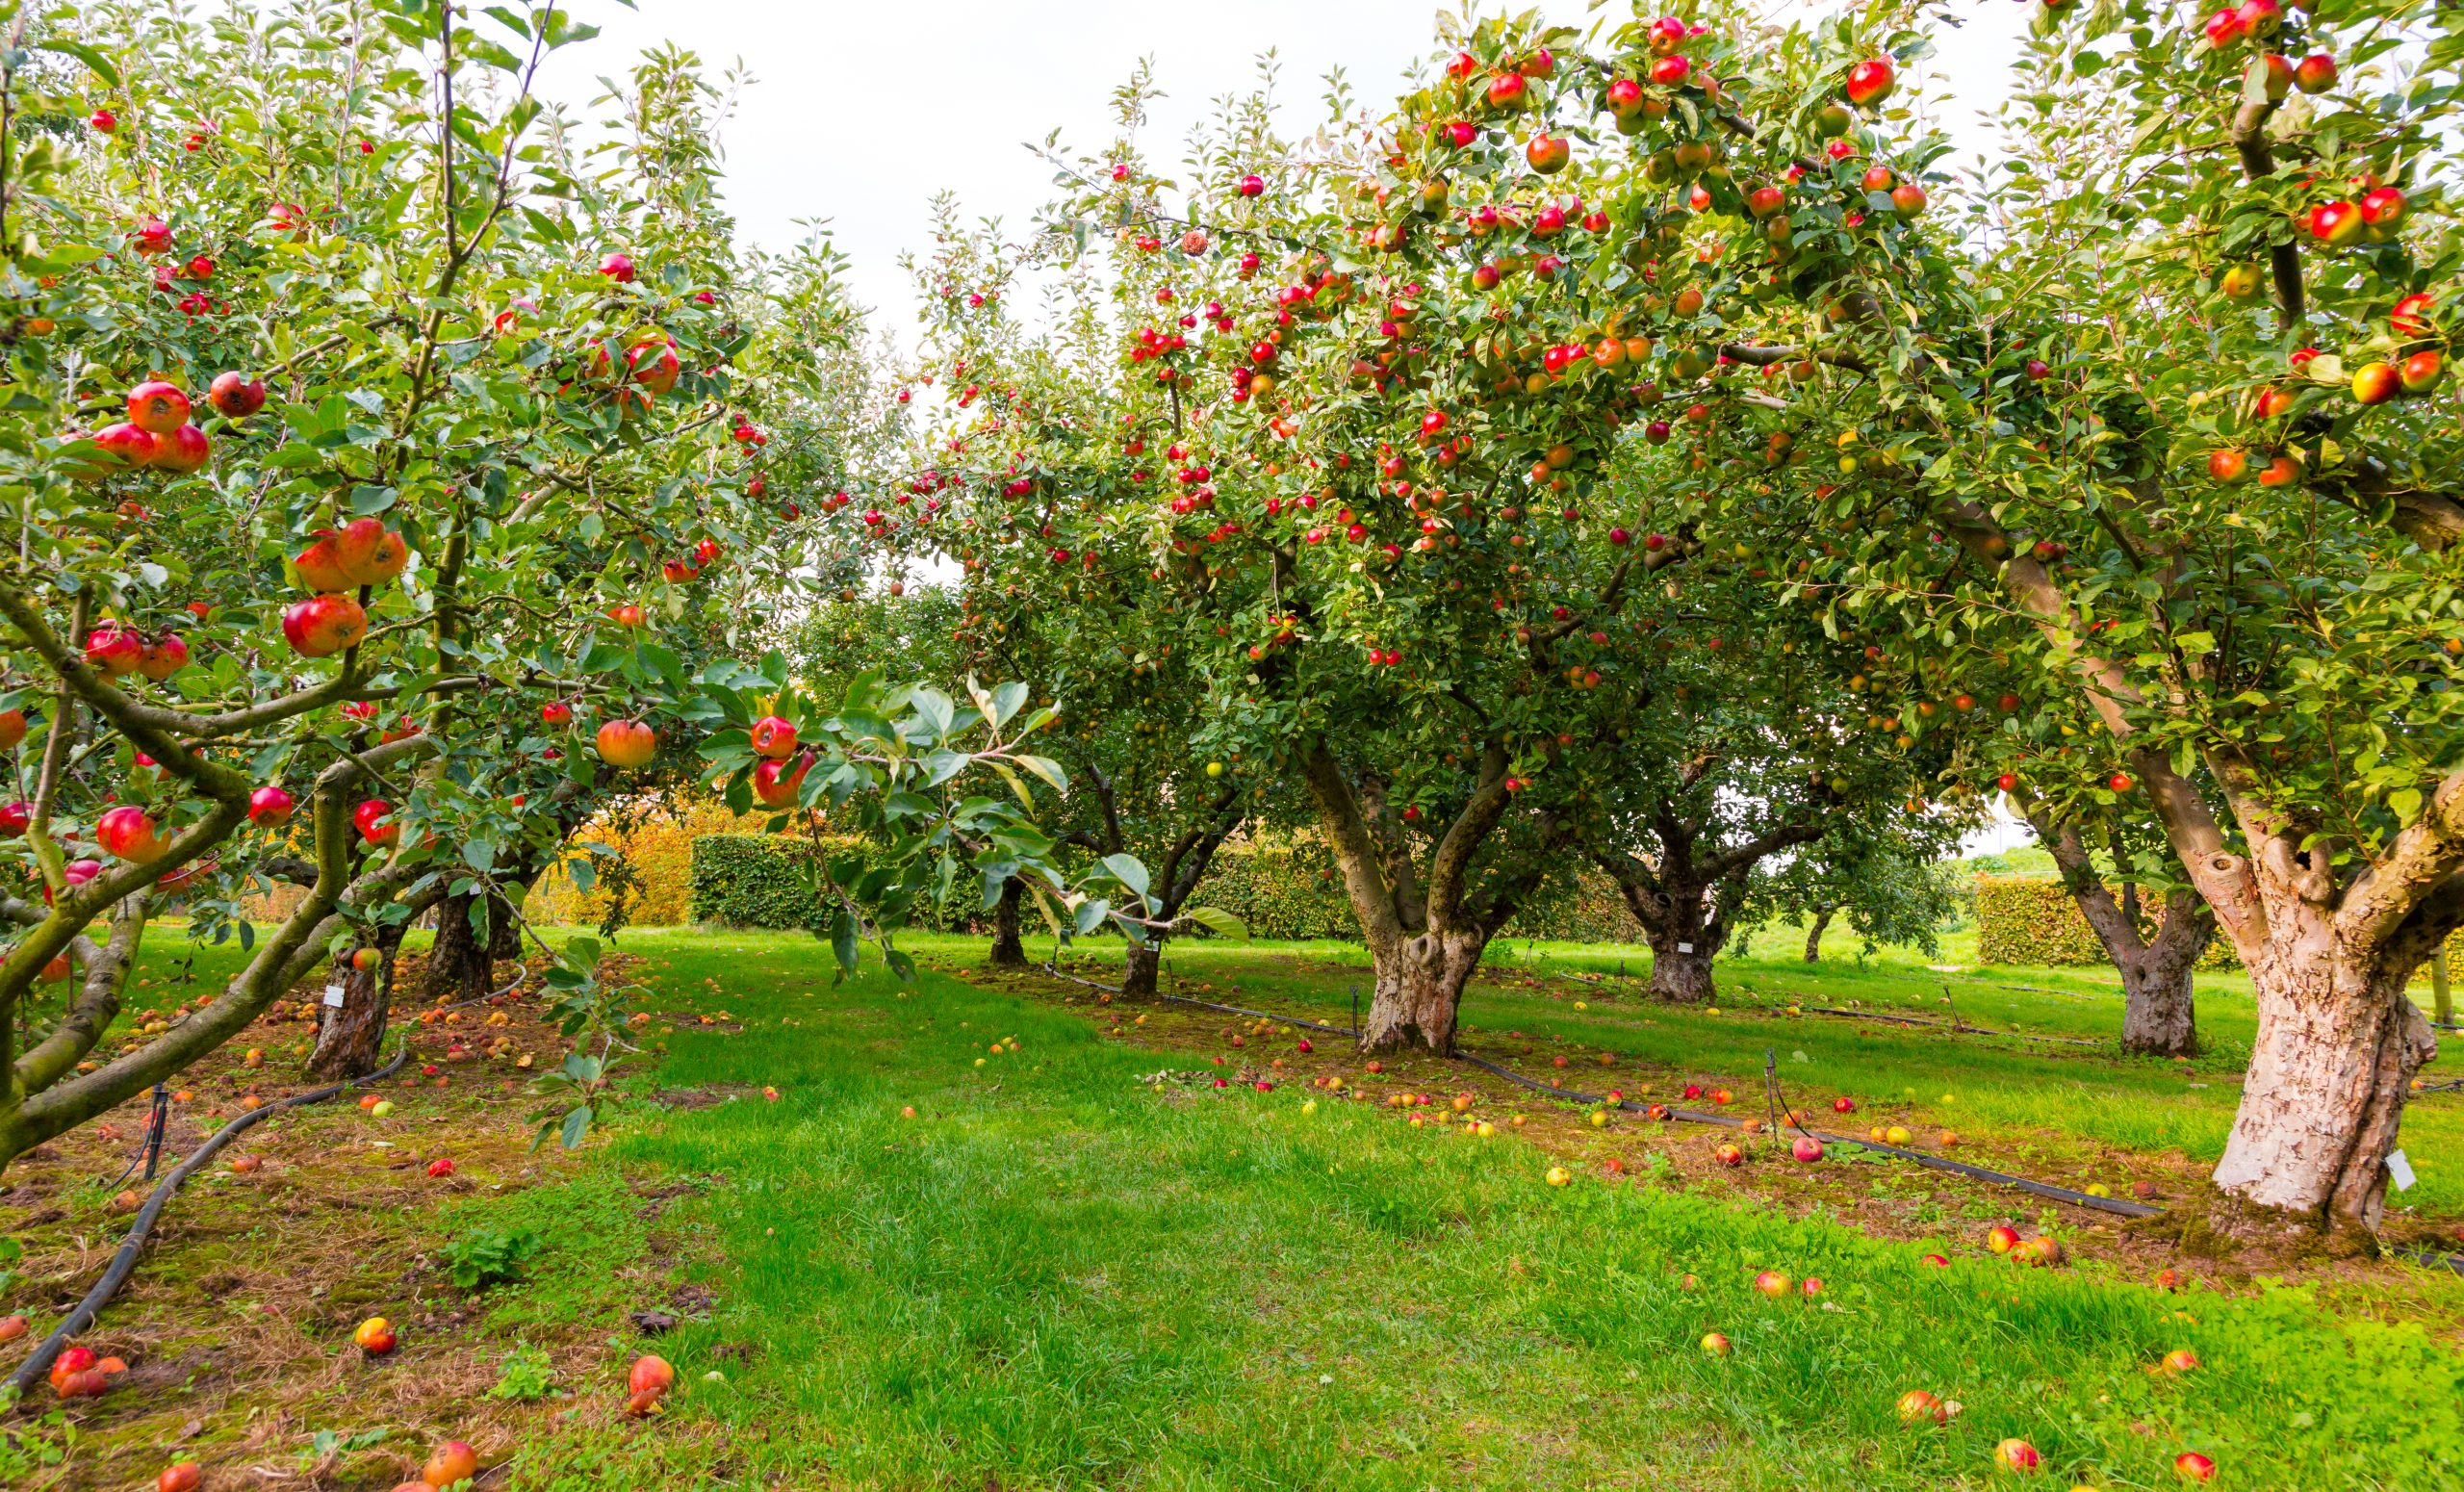 Apple,On,Trees,In,Orchard,In,Fall,Season